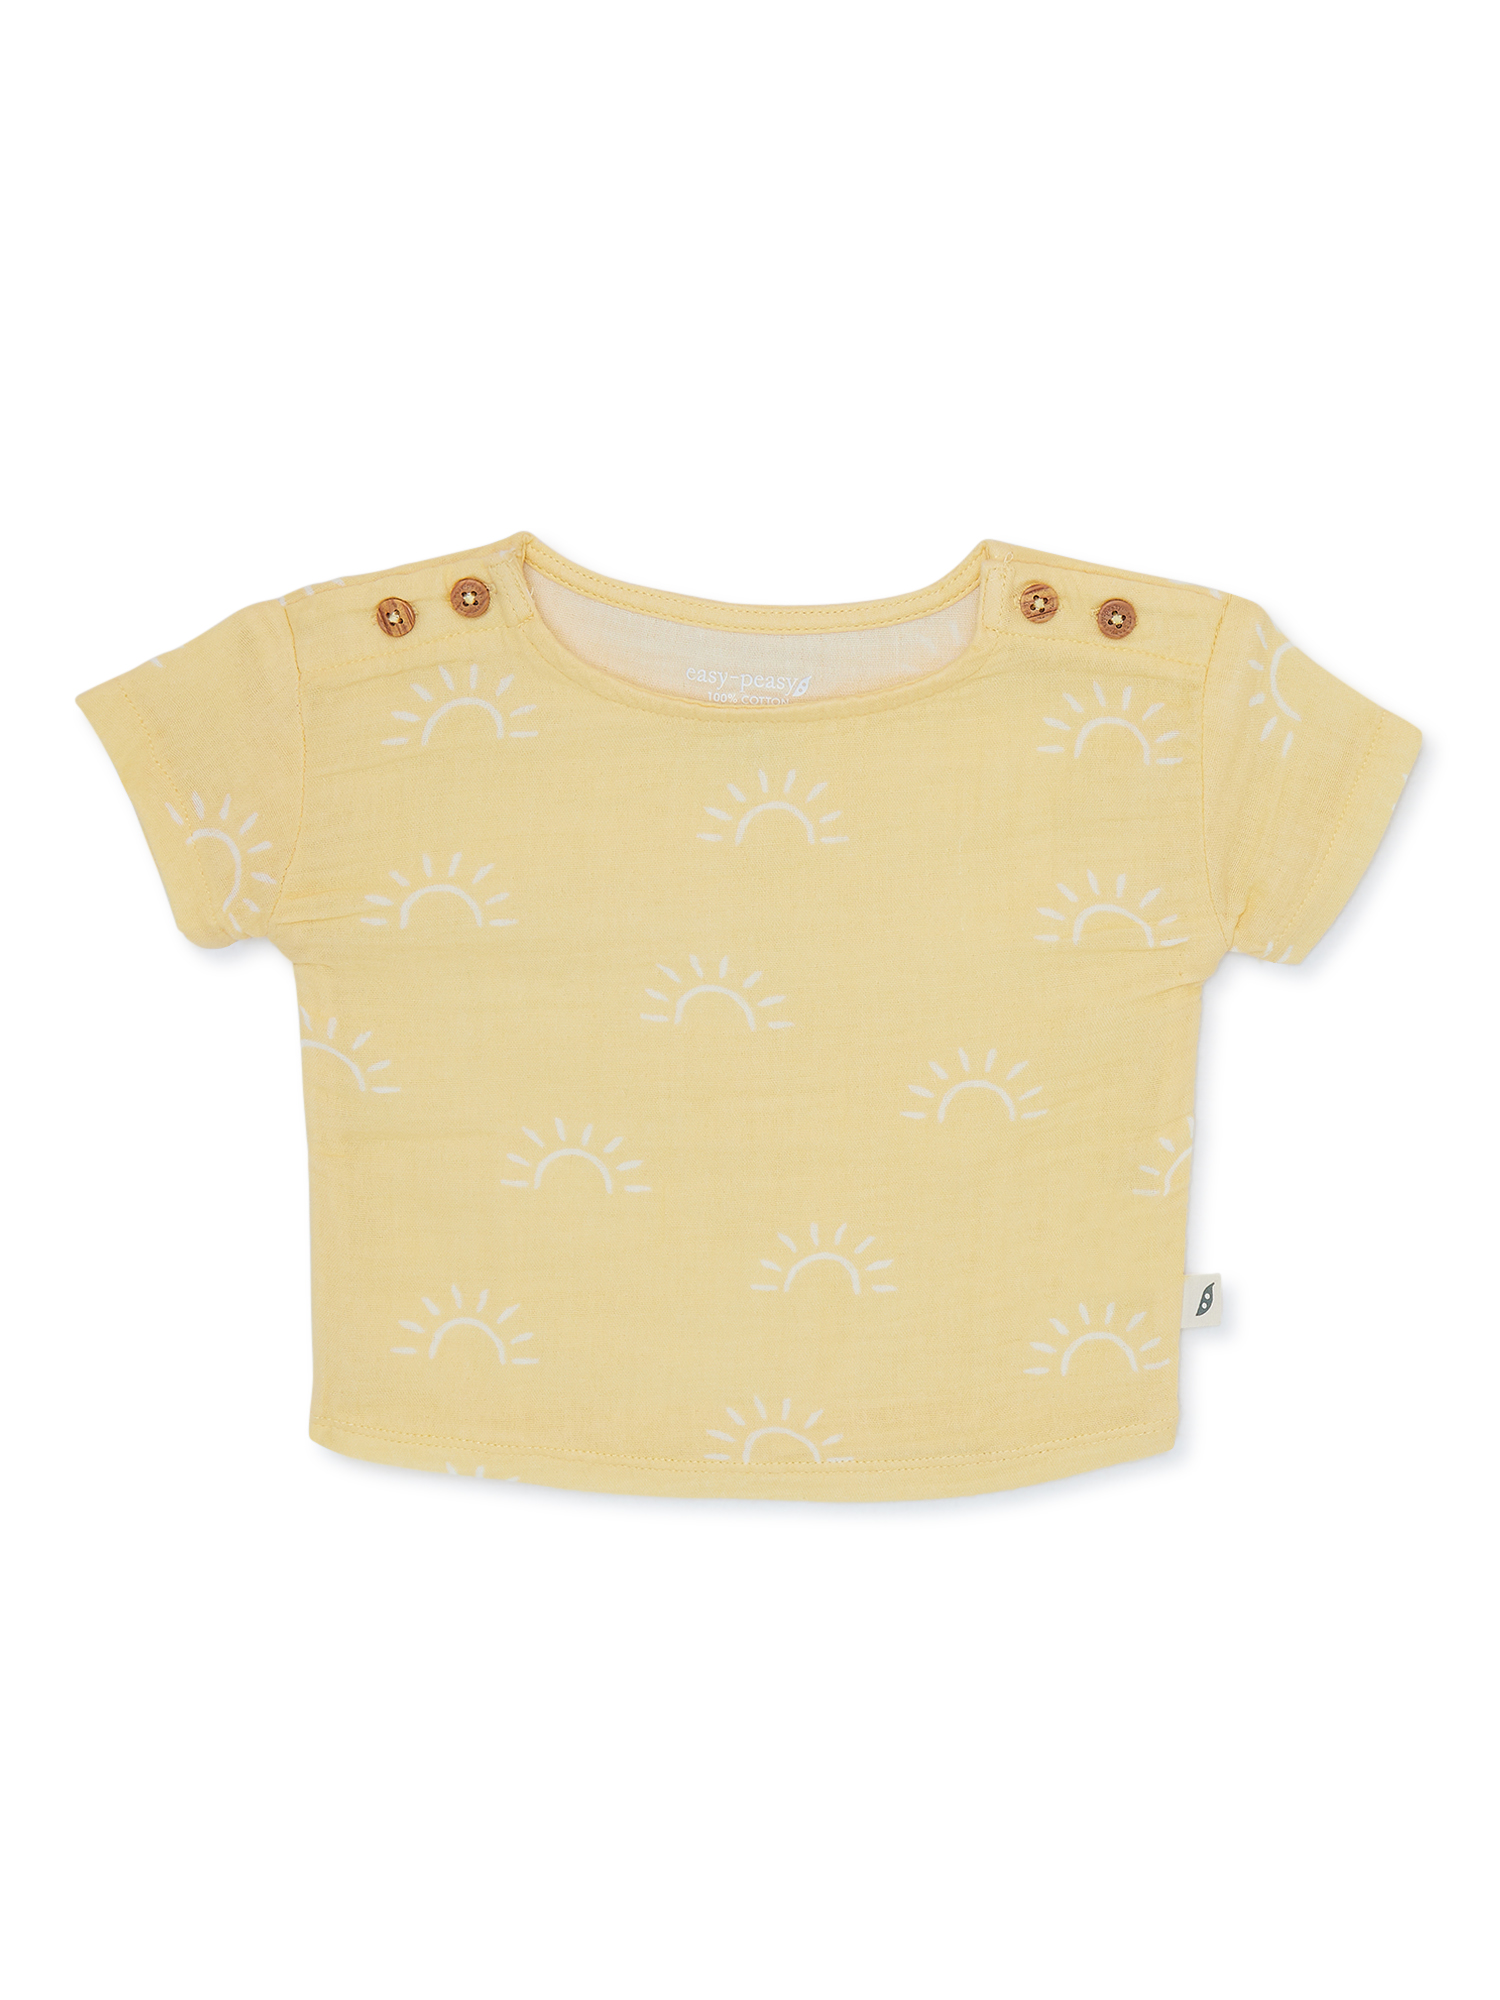 easy-peasy Baby Short Sleeve Print Woven Tee, Sizes 0-24 Months - image 1 of 4